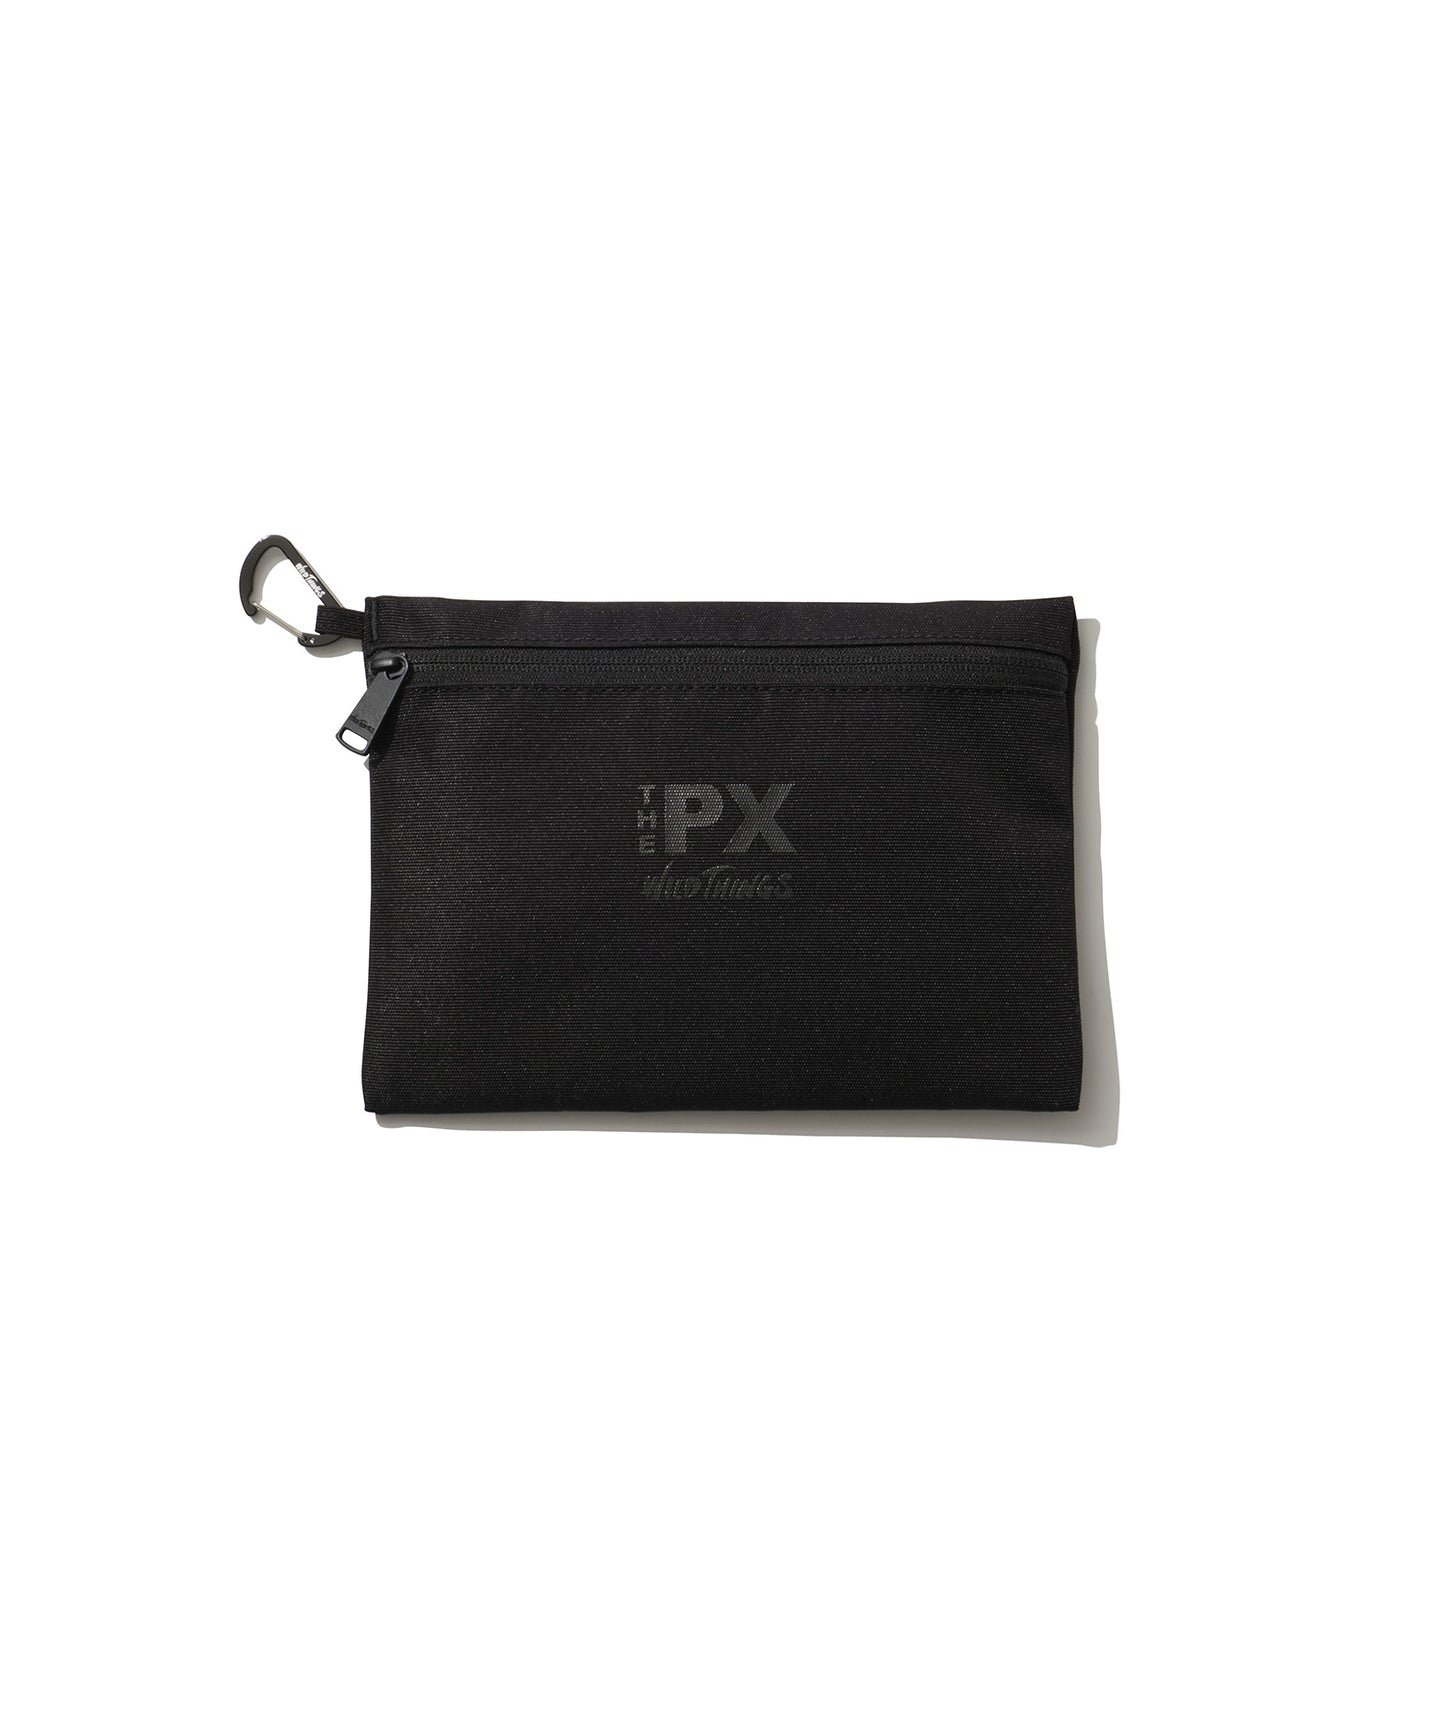 [WILD THINGS ワイルドシングス] THE PX MULTI POUCH A5｜マルチポーチ(A5)＜BLACK＞